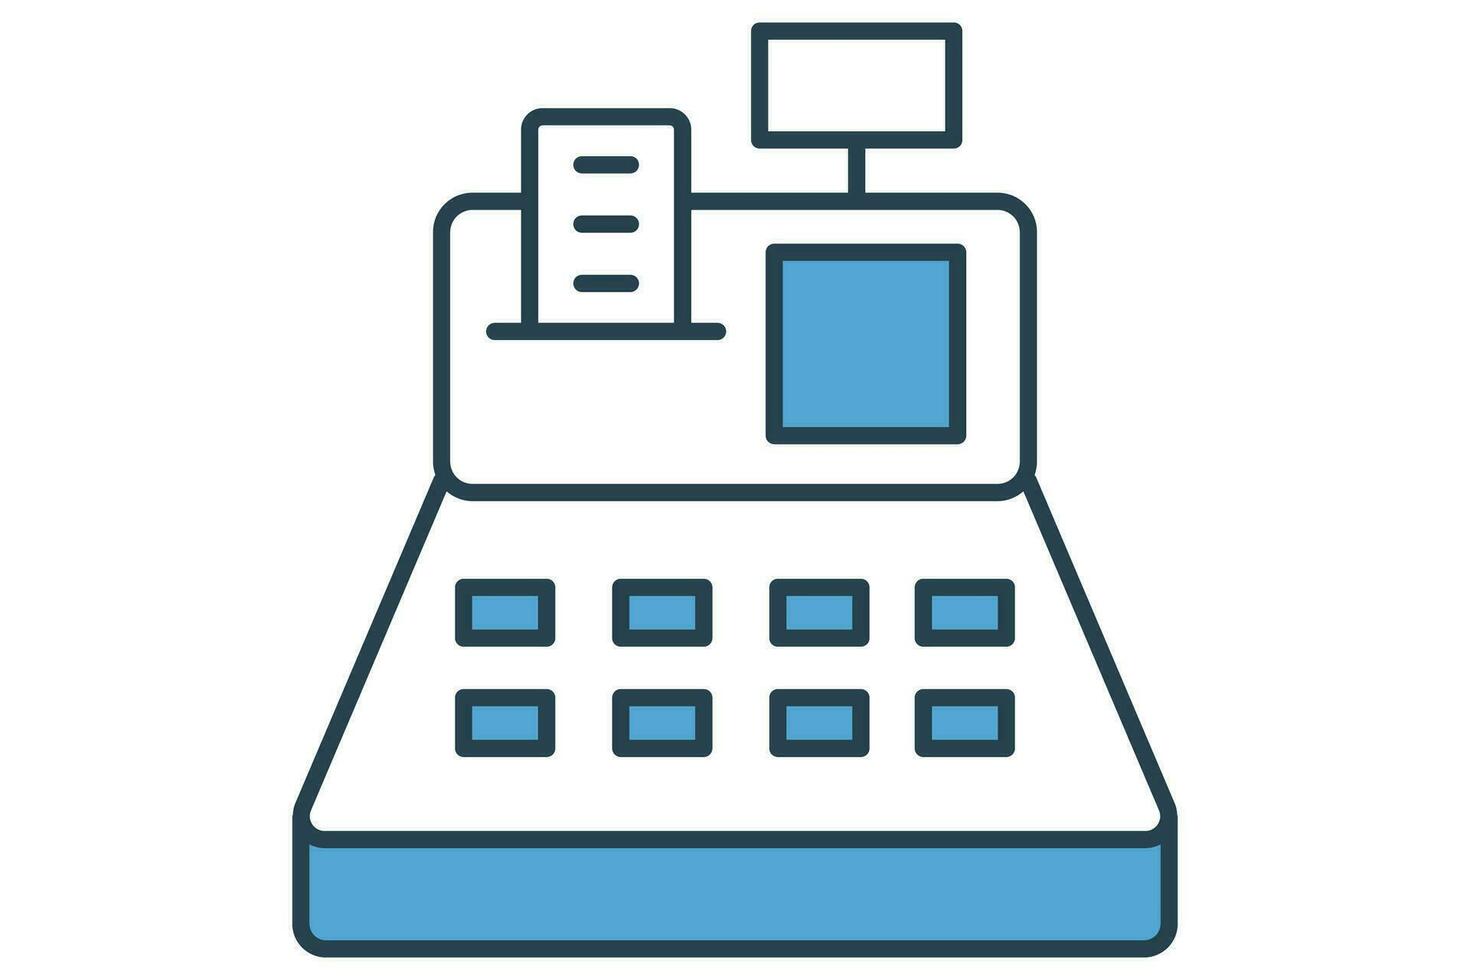 cash register icon. icon related to  retail and financial transactions. flat line icon style. element illustration vector